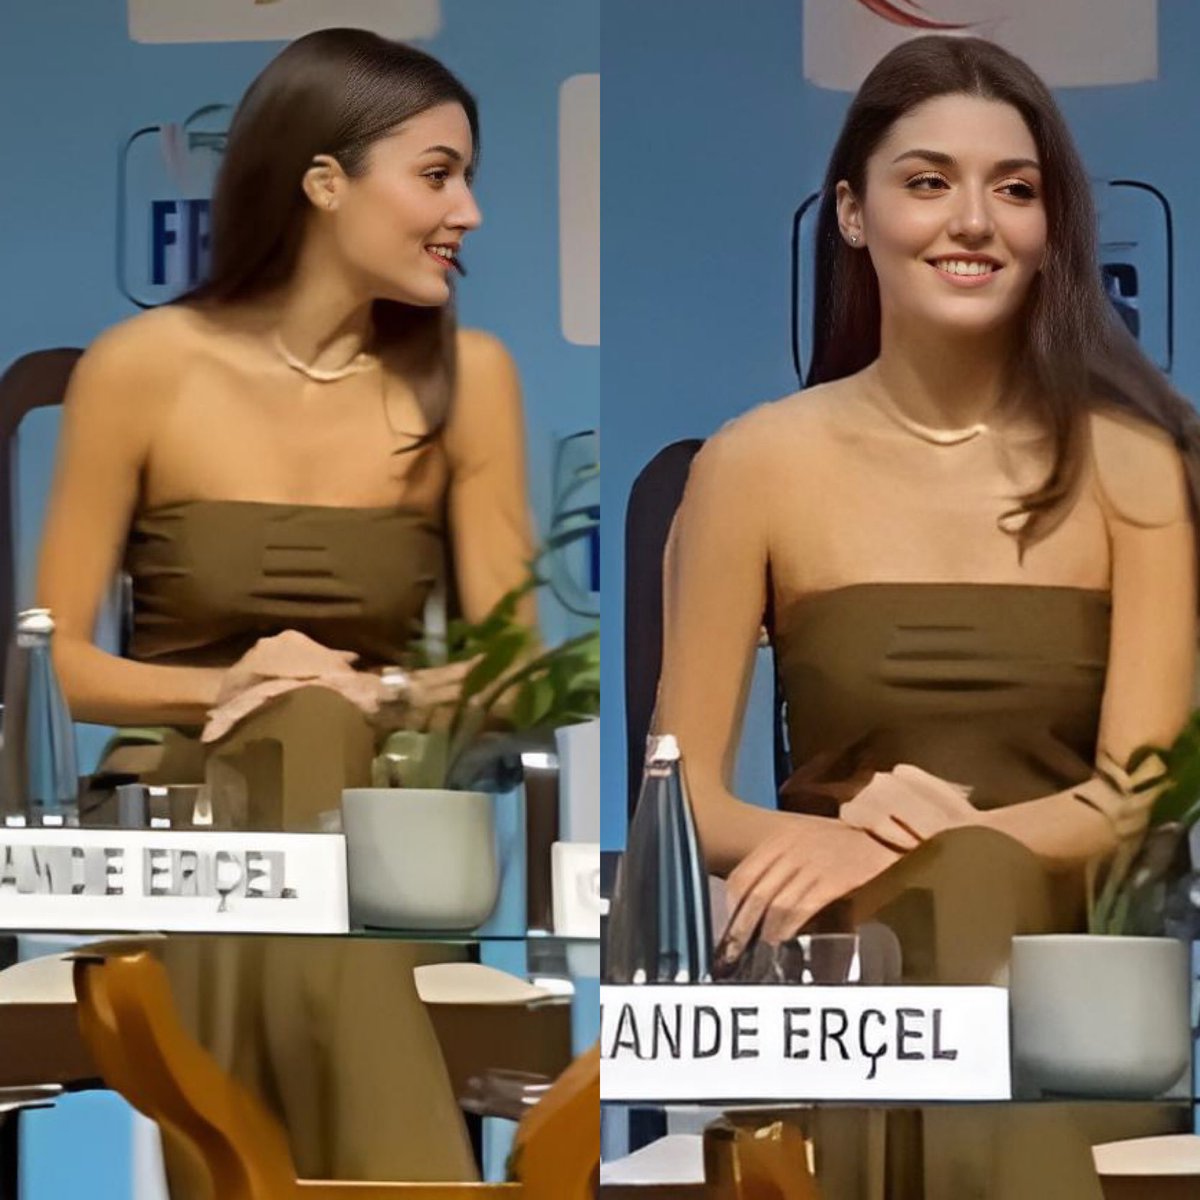 The gorgeous #HandeErçeI is here at the #FICCIFrames ♥️